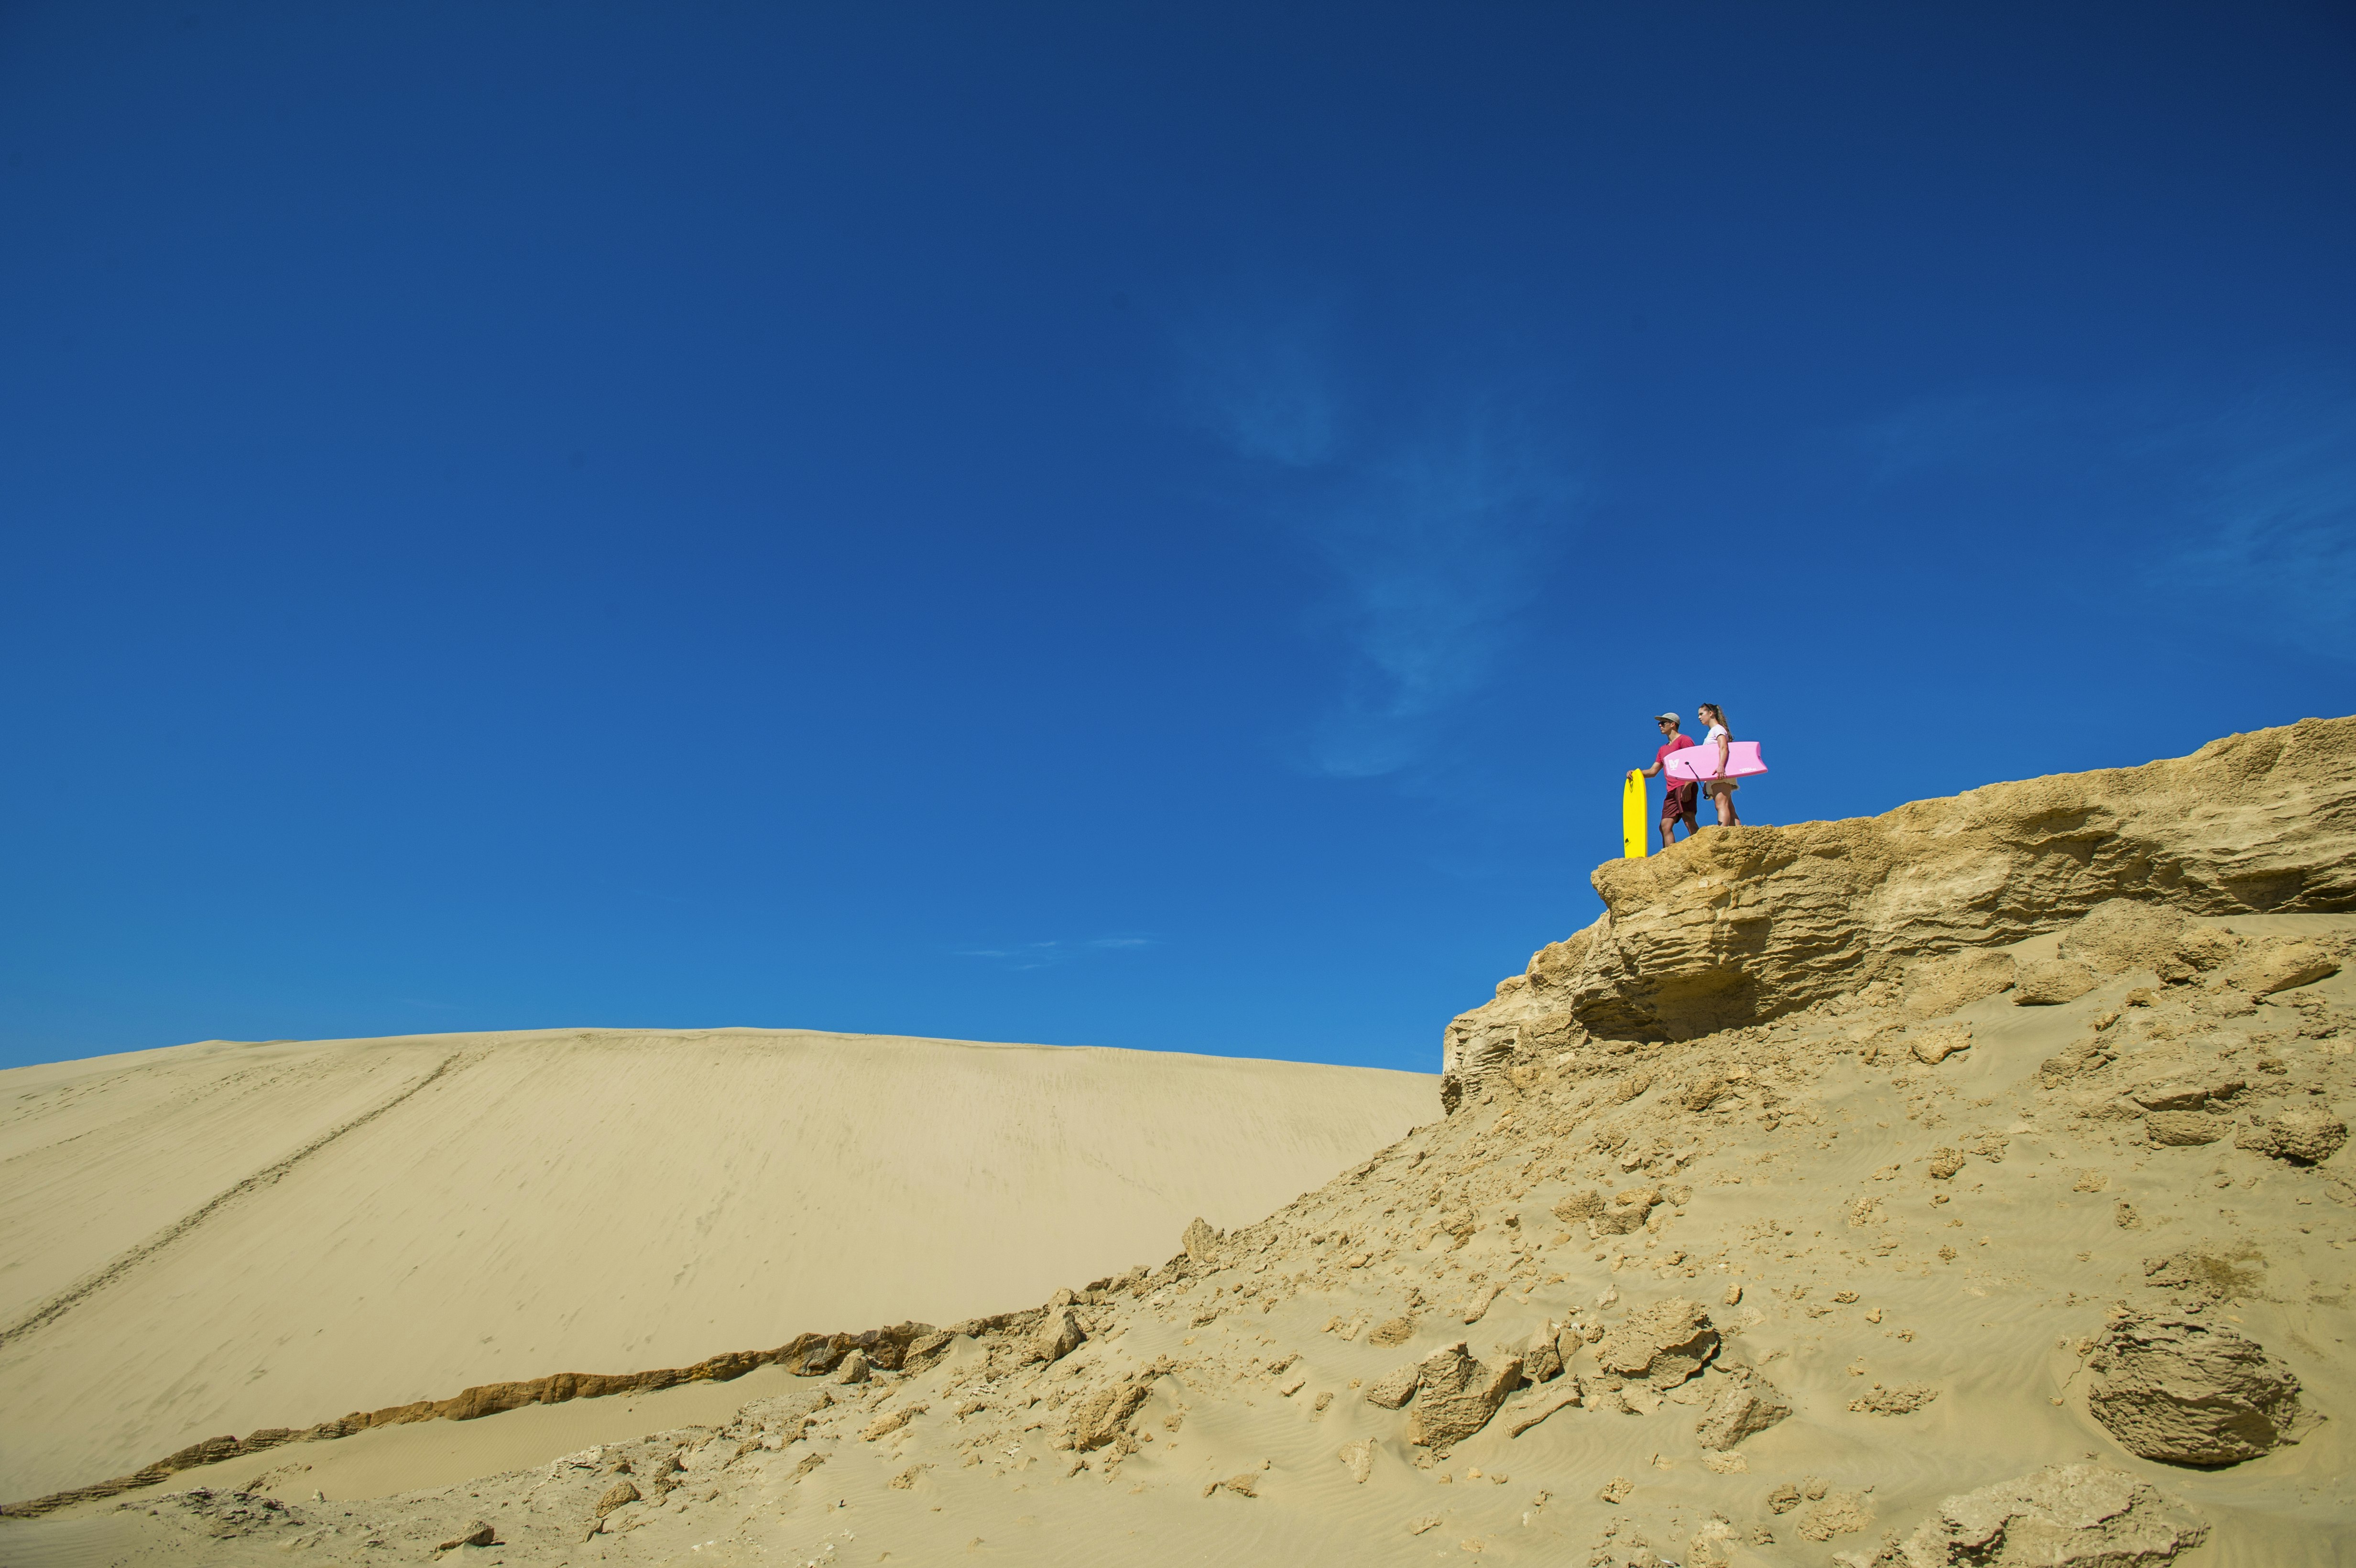 A pair of people stand at the top of dune, looking out on the arid landscape holding brightly colored sandboards.  